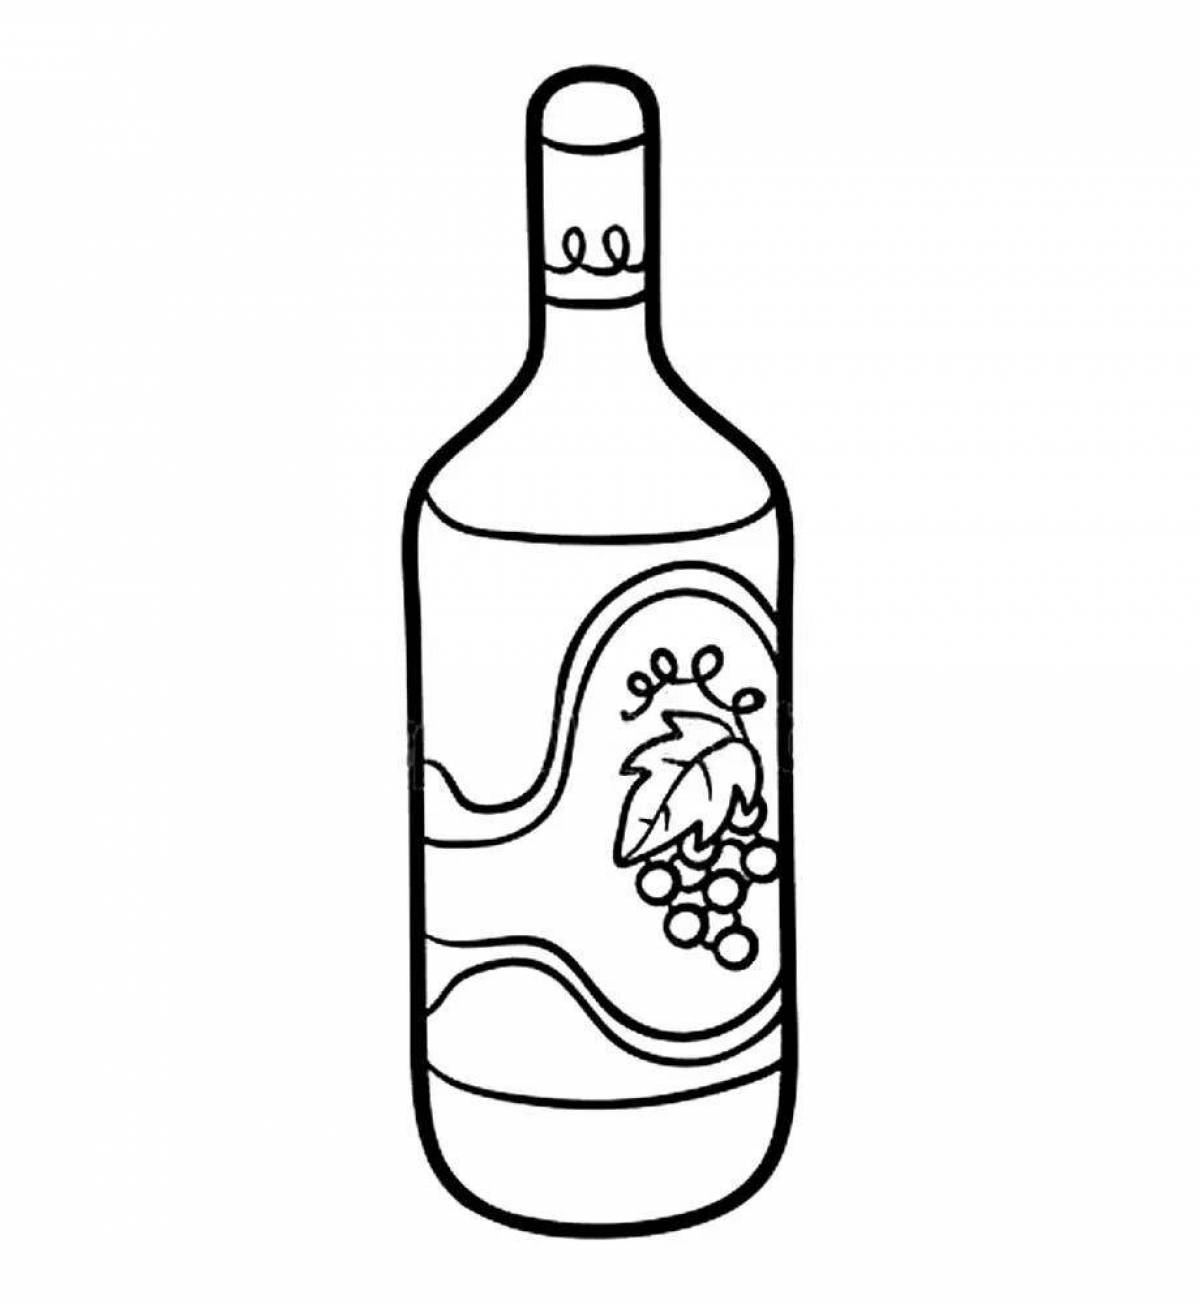 Coloring page mysterious bottle of alcohol